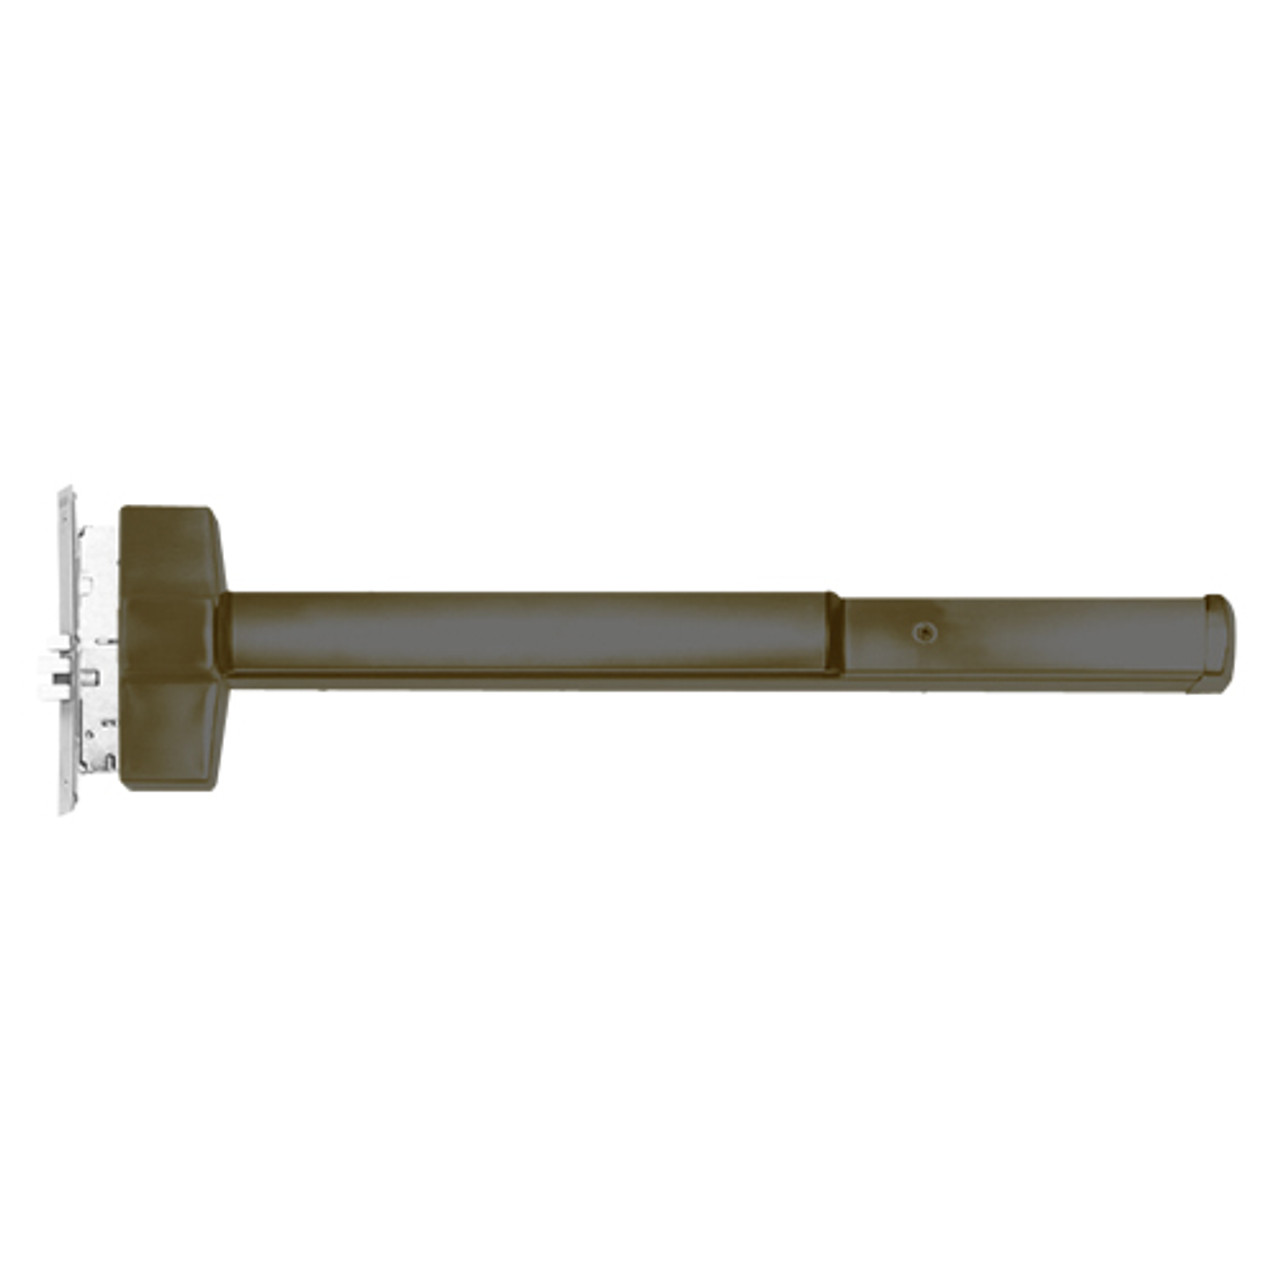 ED5657L-613-W048-MELR-M92-LHR Corbin ED5600 Series Non Fire Rated Mortise Exit Device with Motorized Latch Retraction and Touchbar Monitoring in Oil Rubbed Bronze Finish